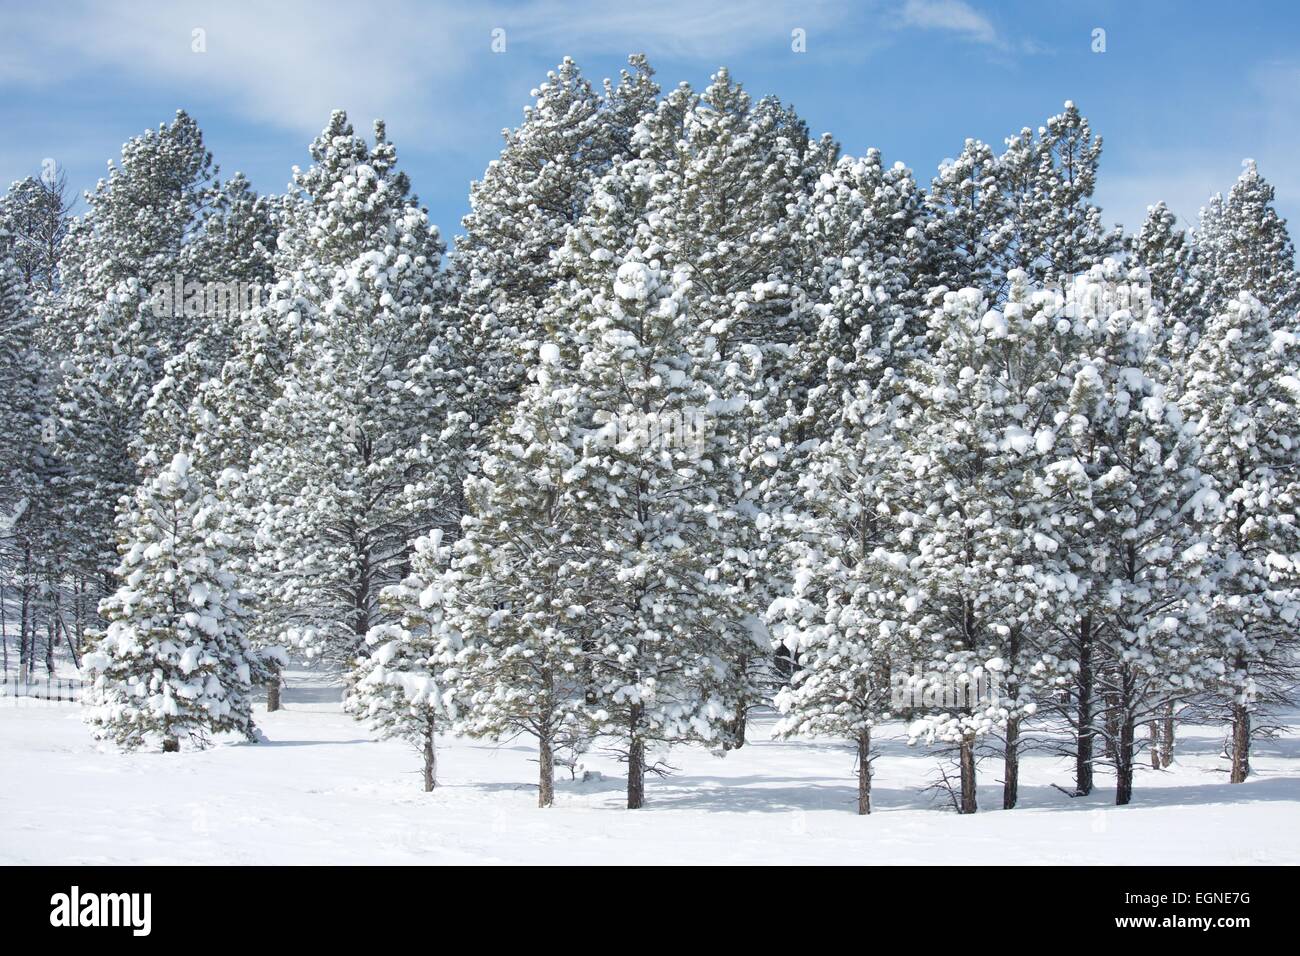 A beautiful forest with a fresh snowfall in Bryce Canyon National Park, Utah. Stock Photo